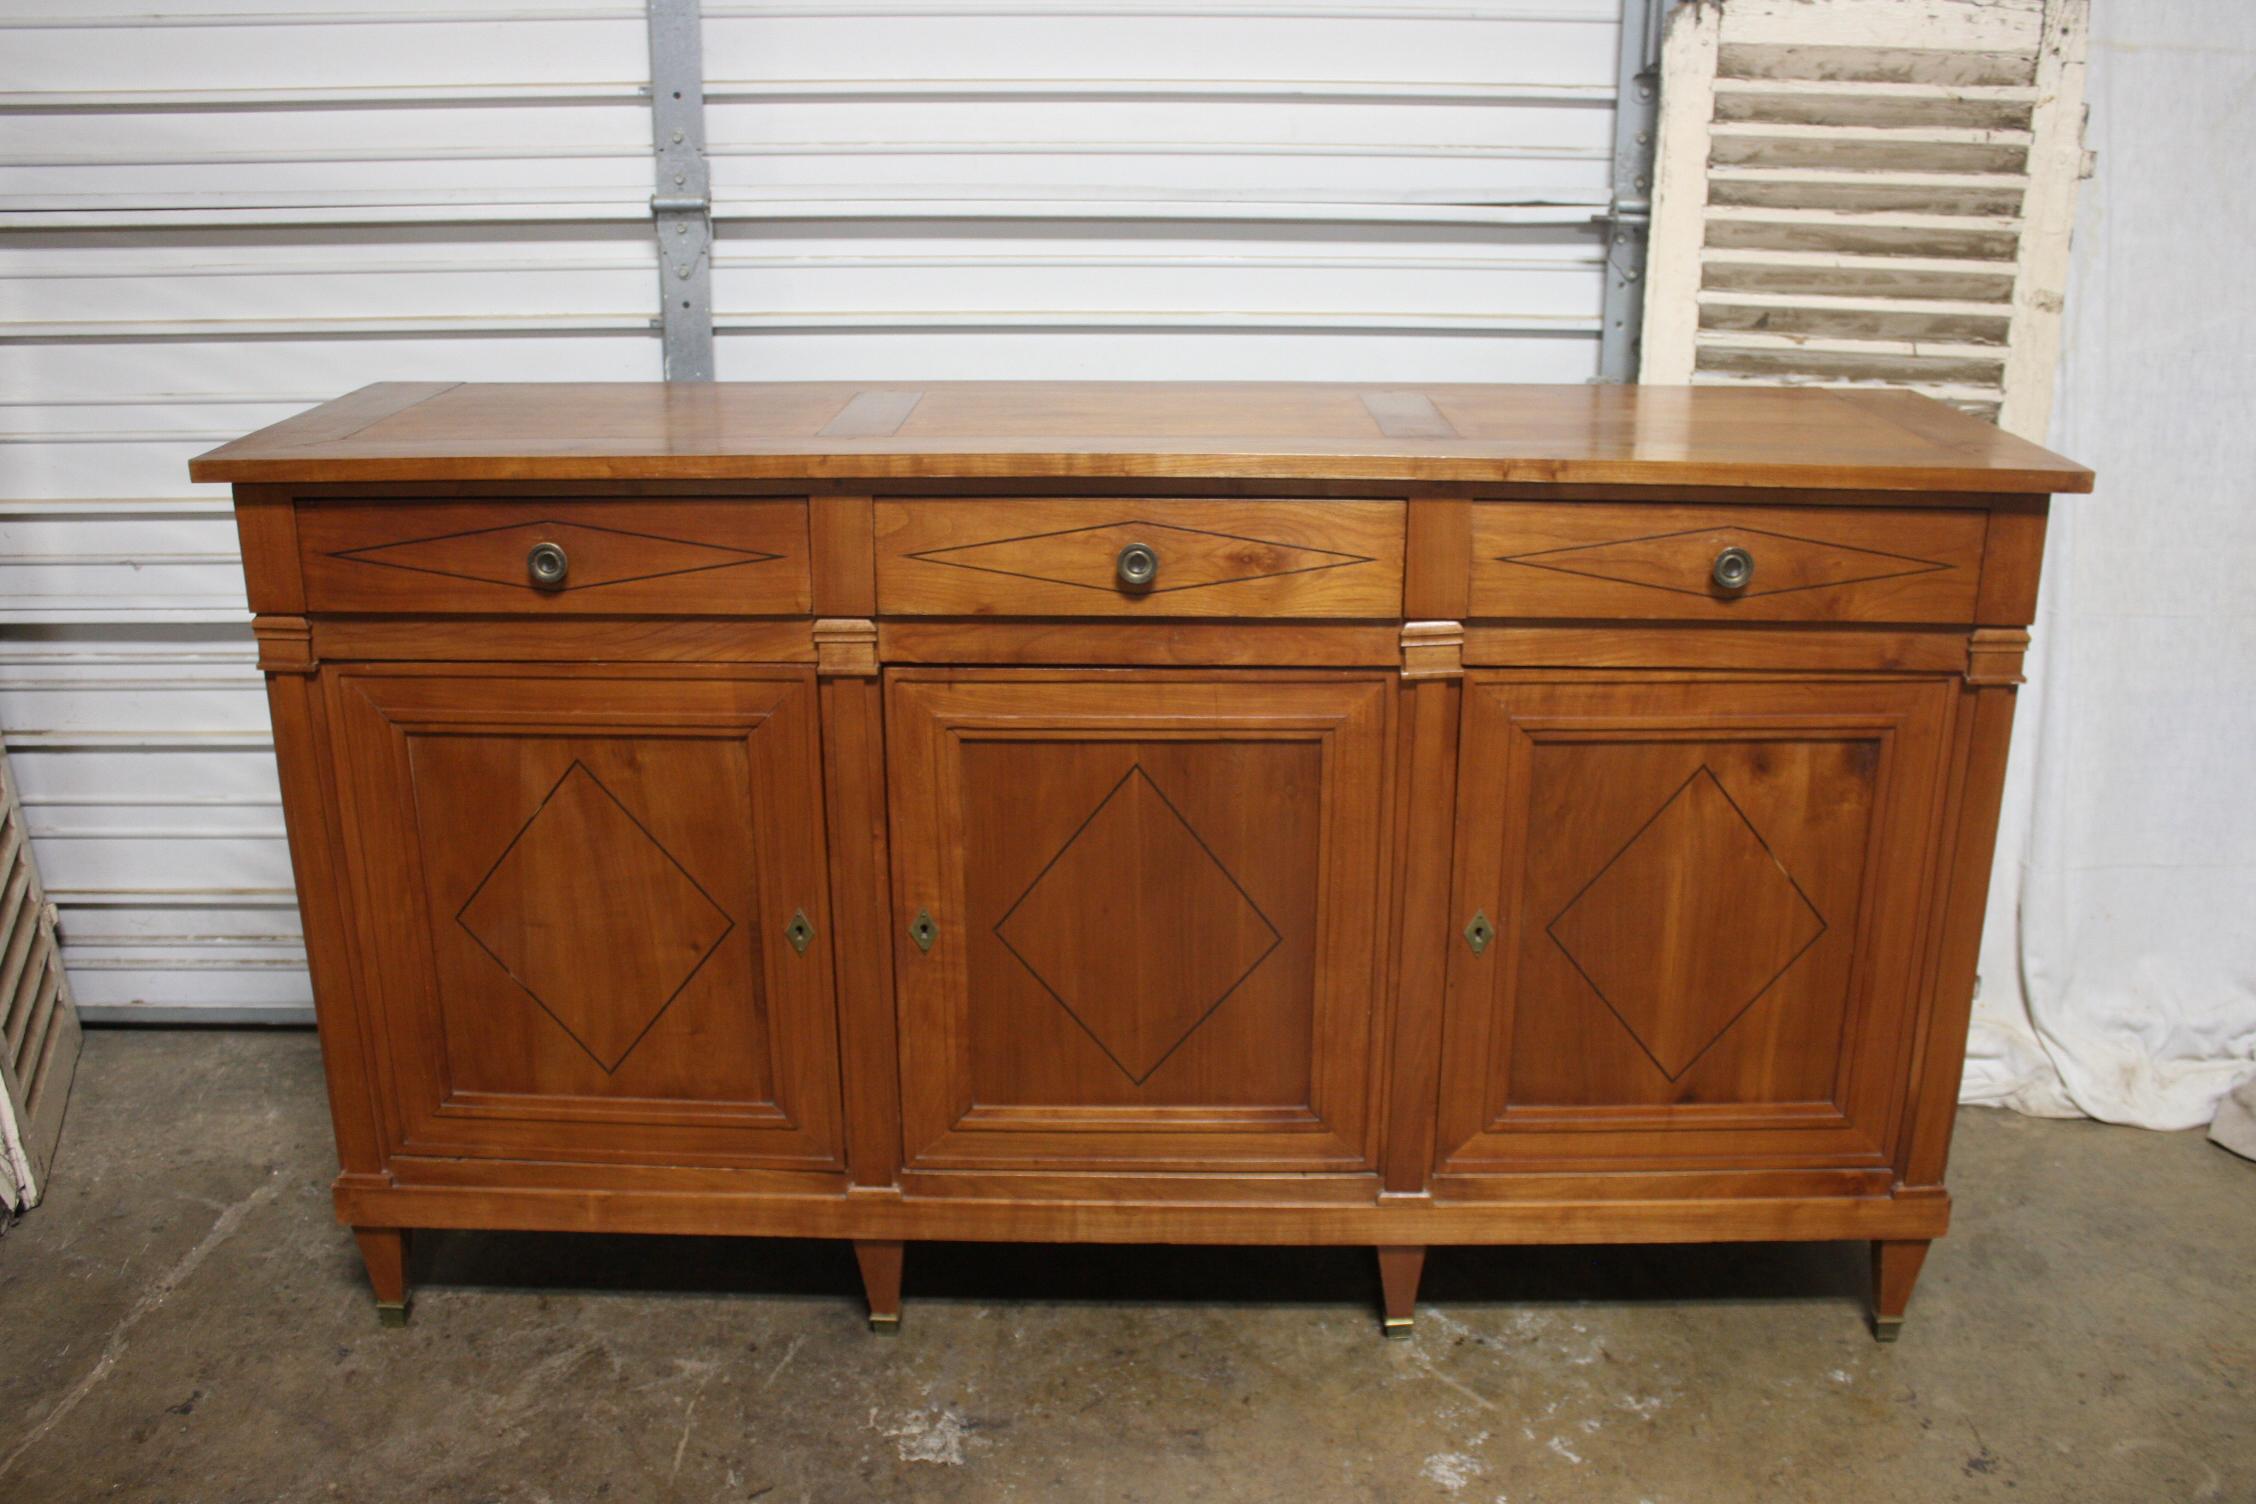 This sideboard is in fruitwood with diamond inlay on the doors and drawers. Easy to place anywhere at home.